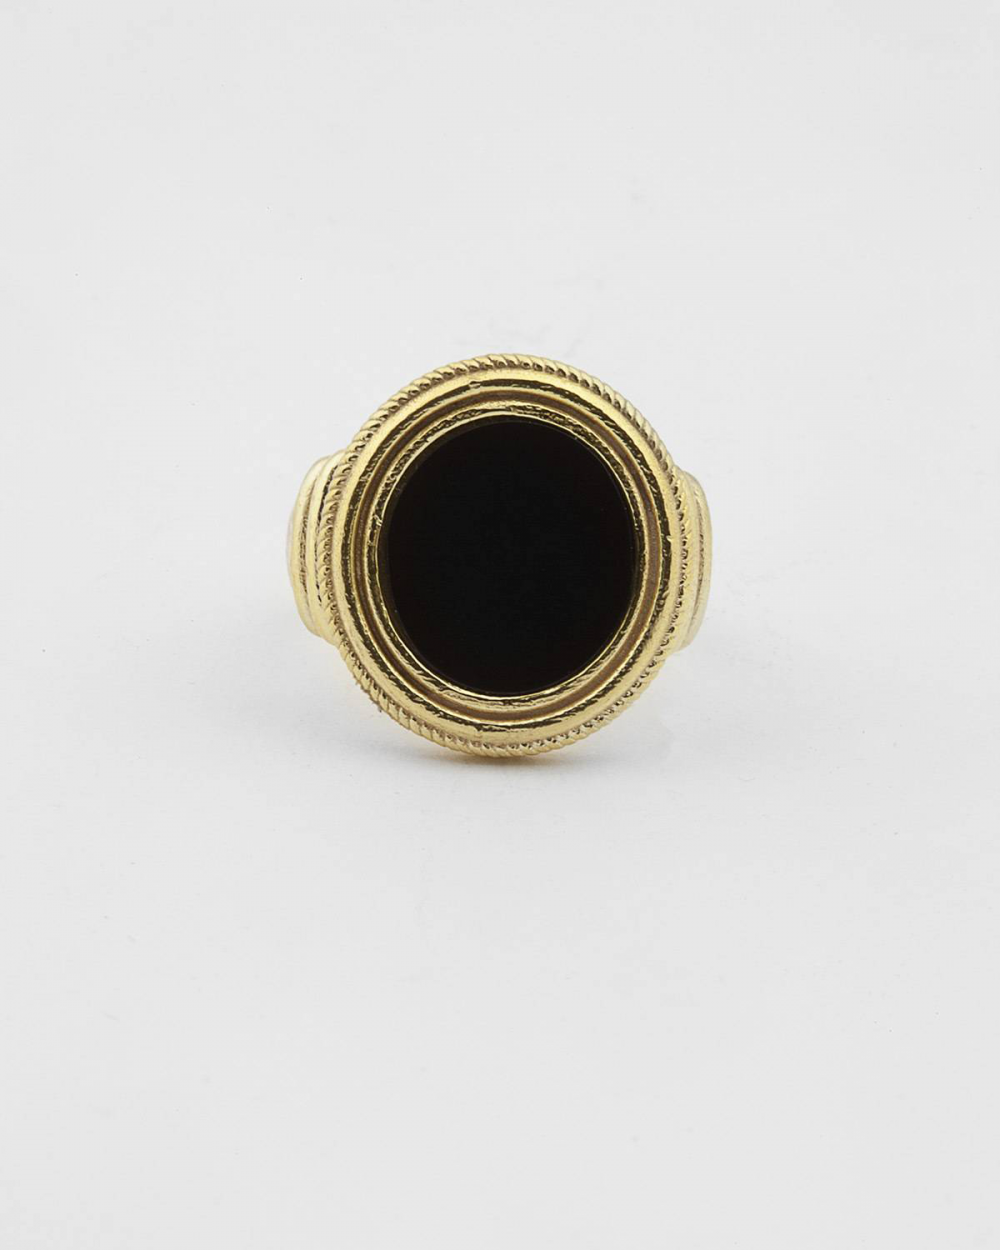 YELLOW GOLD ANTIQUE ROMAN COIN ONYX SIGNET RING